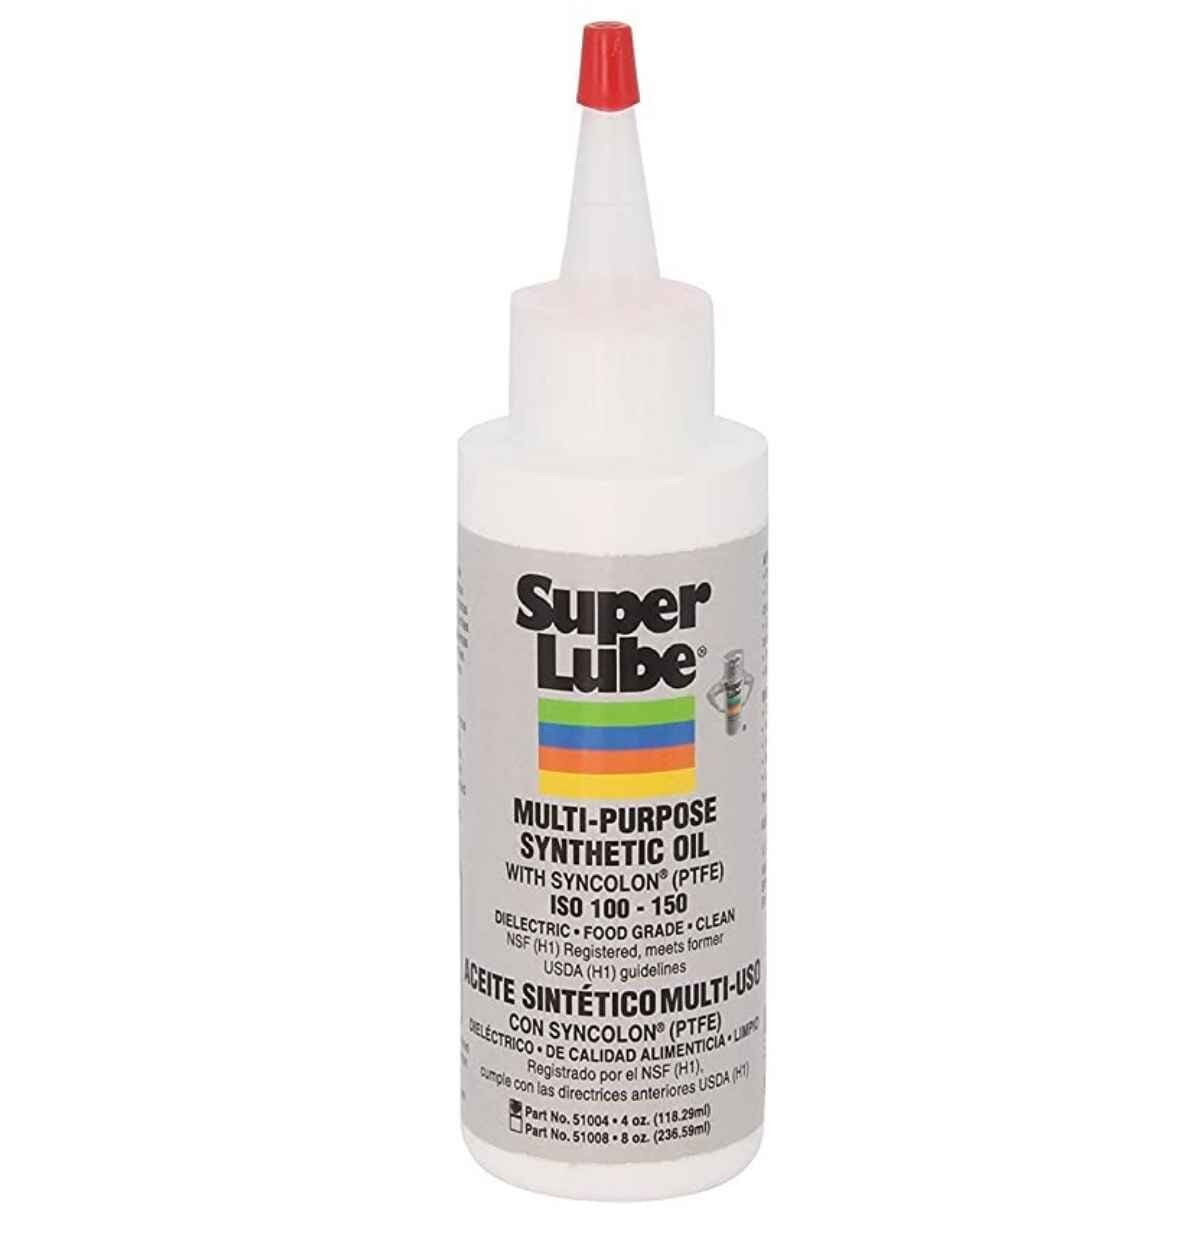 Super Lube Synthetic Oil with PTFE e1675859632279